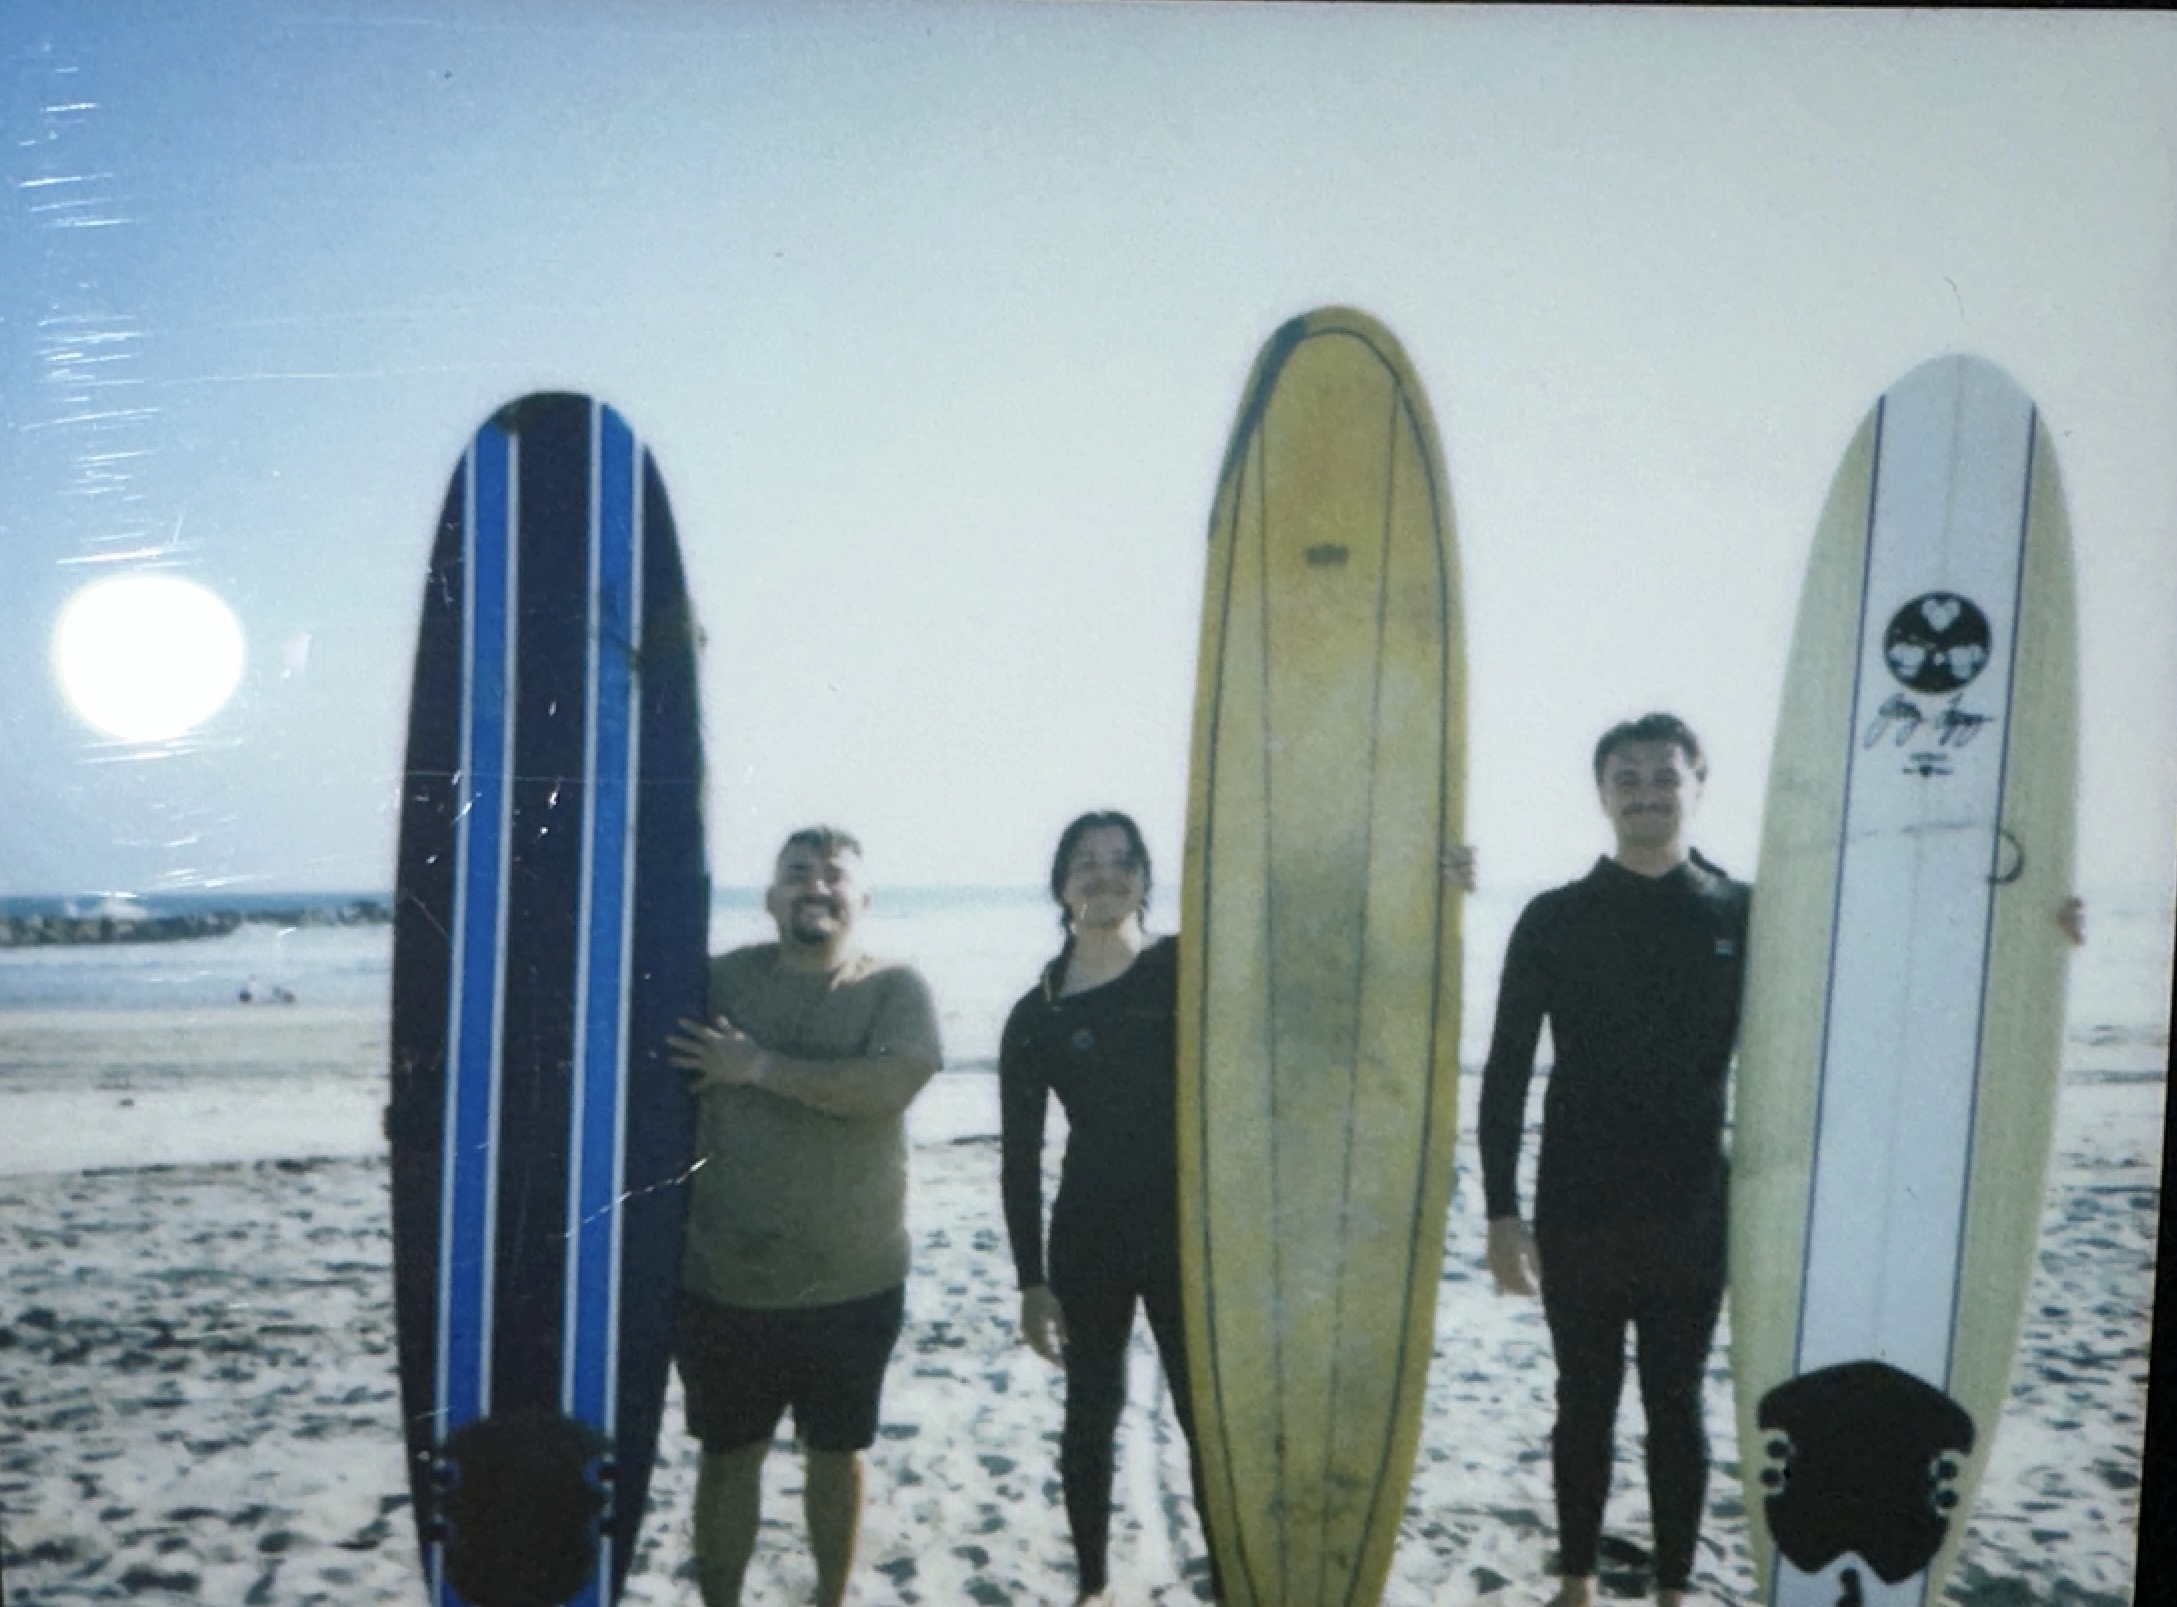 Three young men stand side by side and hold their surfboard upright at a beach on a sunny day.